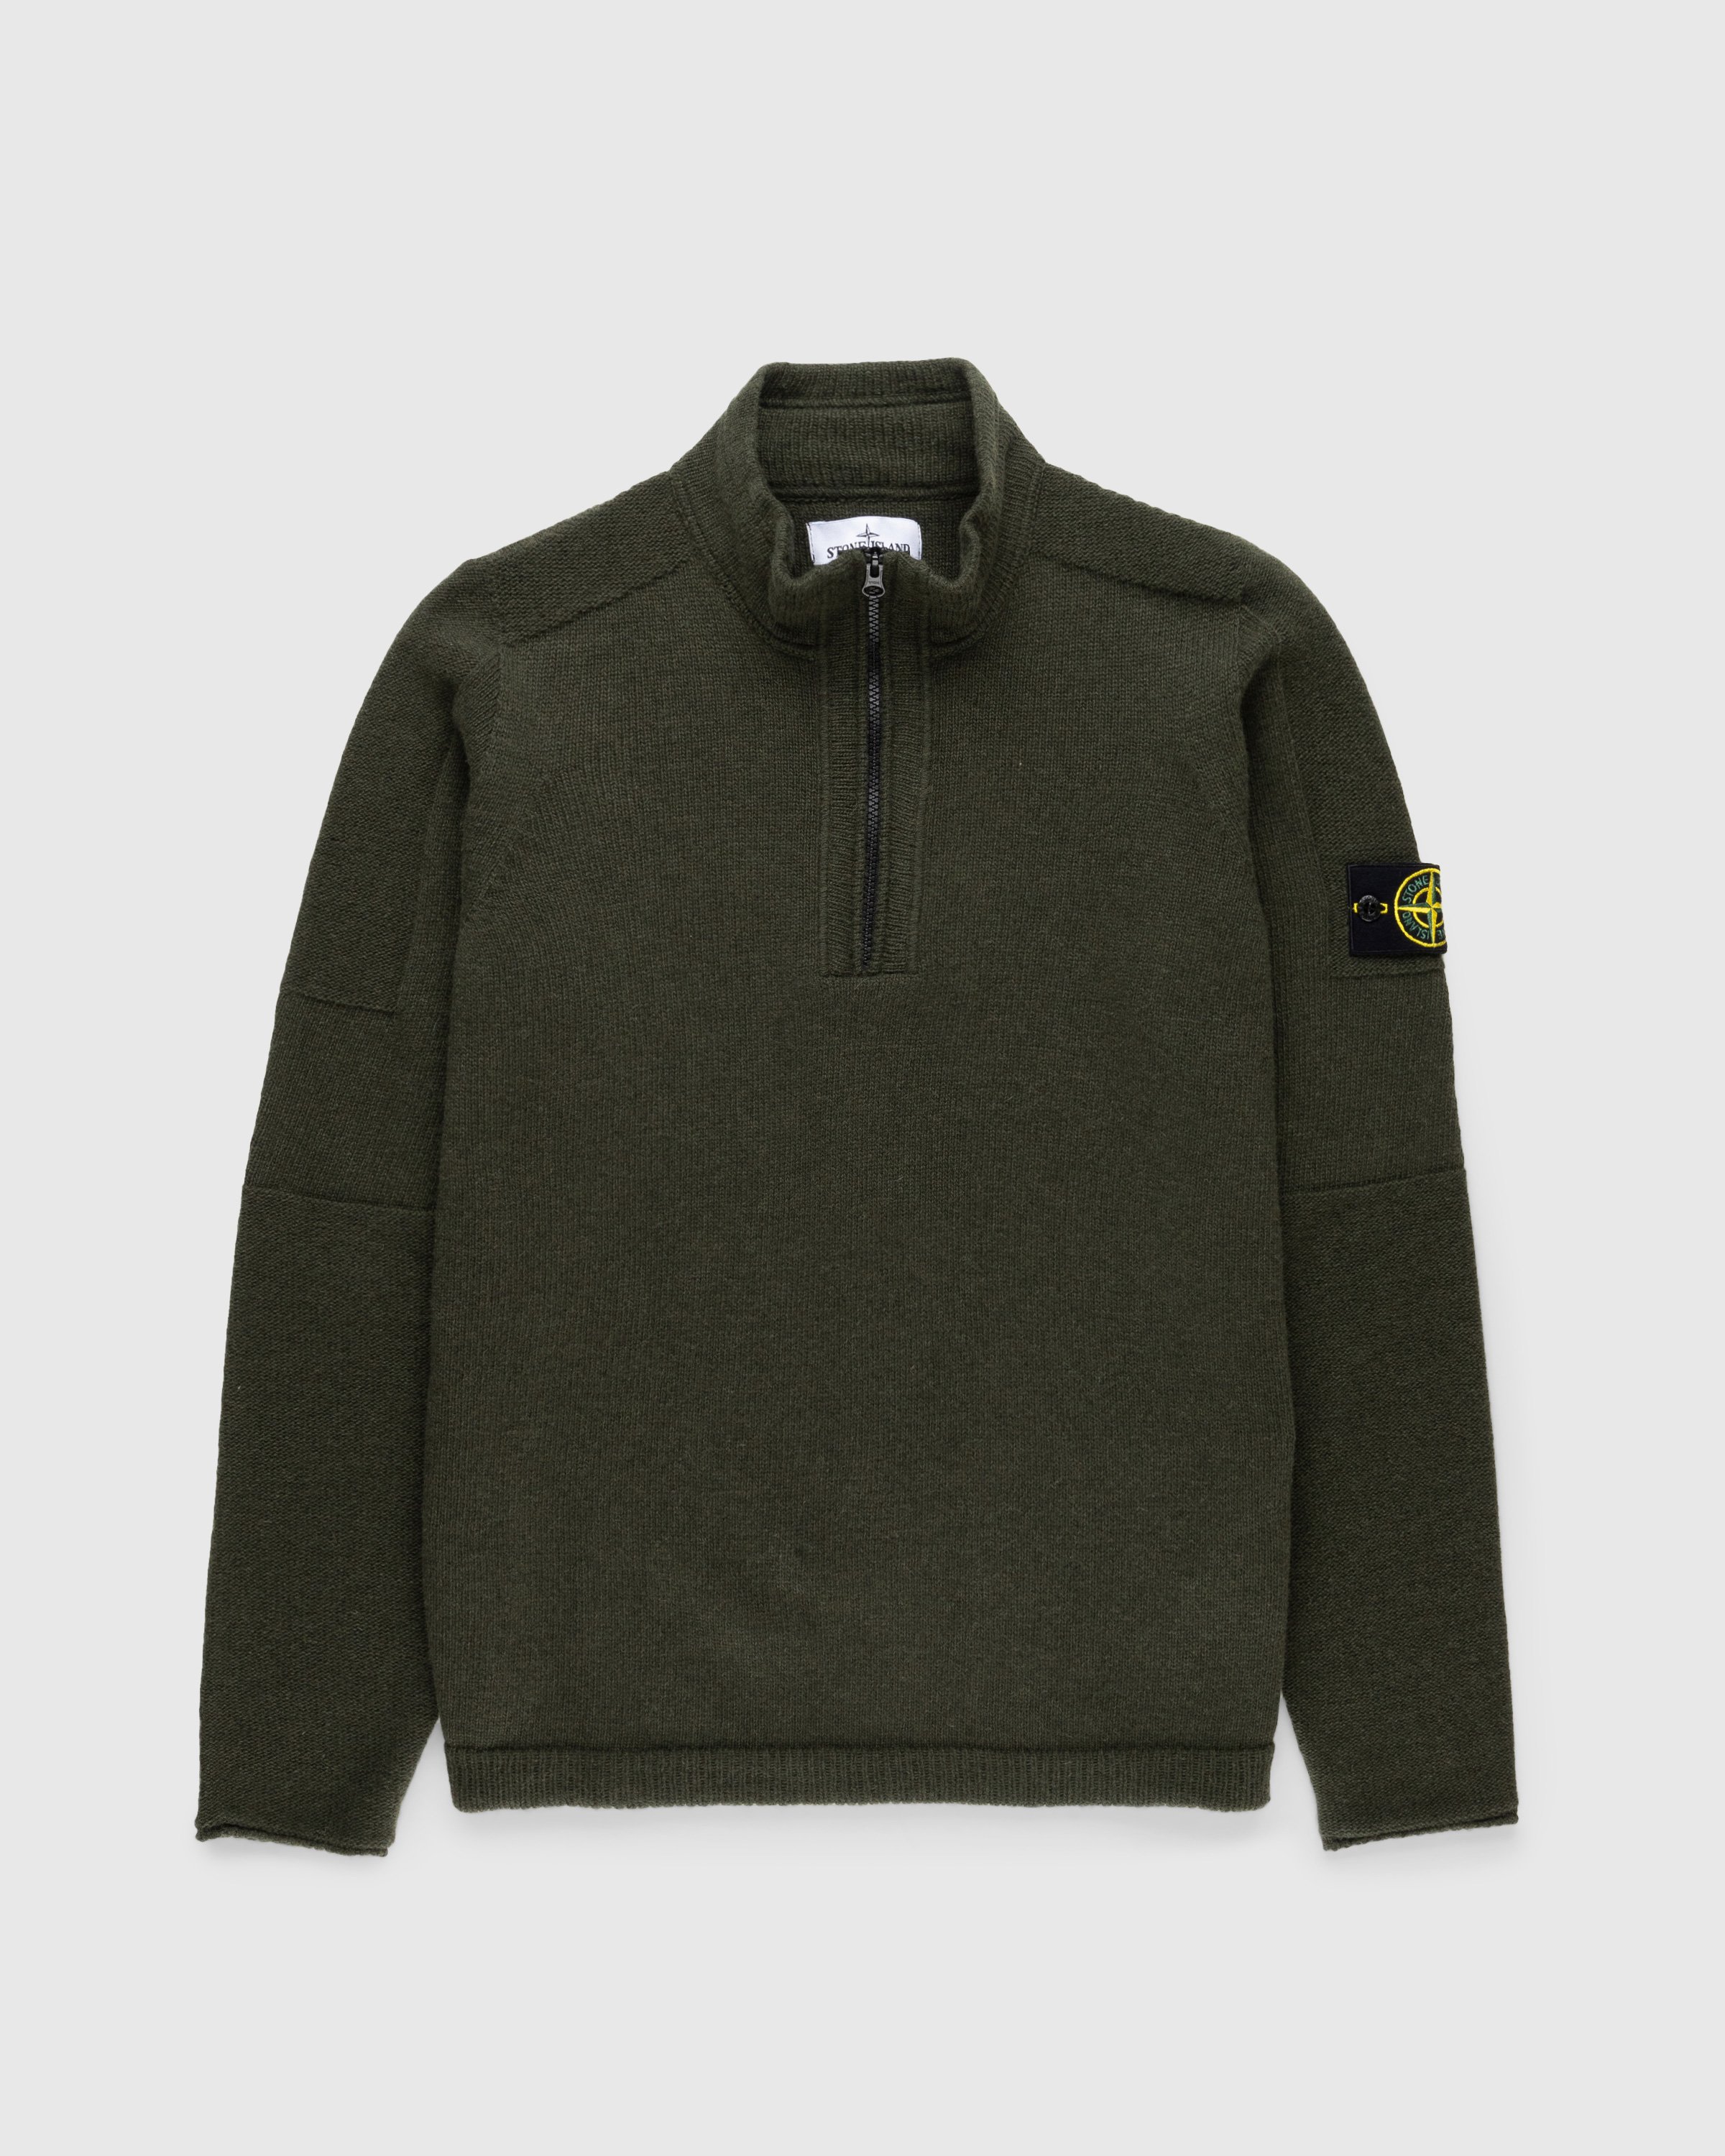 Stone Island - Lambswool Half-Zip Knit Olive - Clothing - Green - Image 1